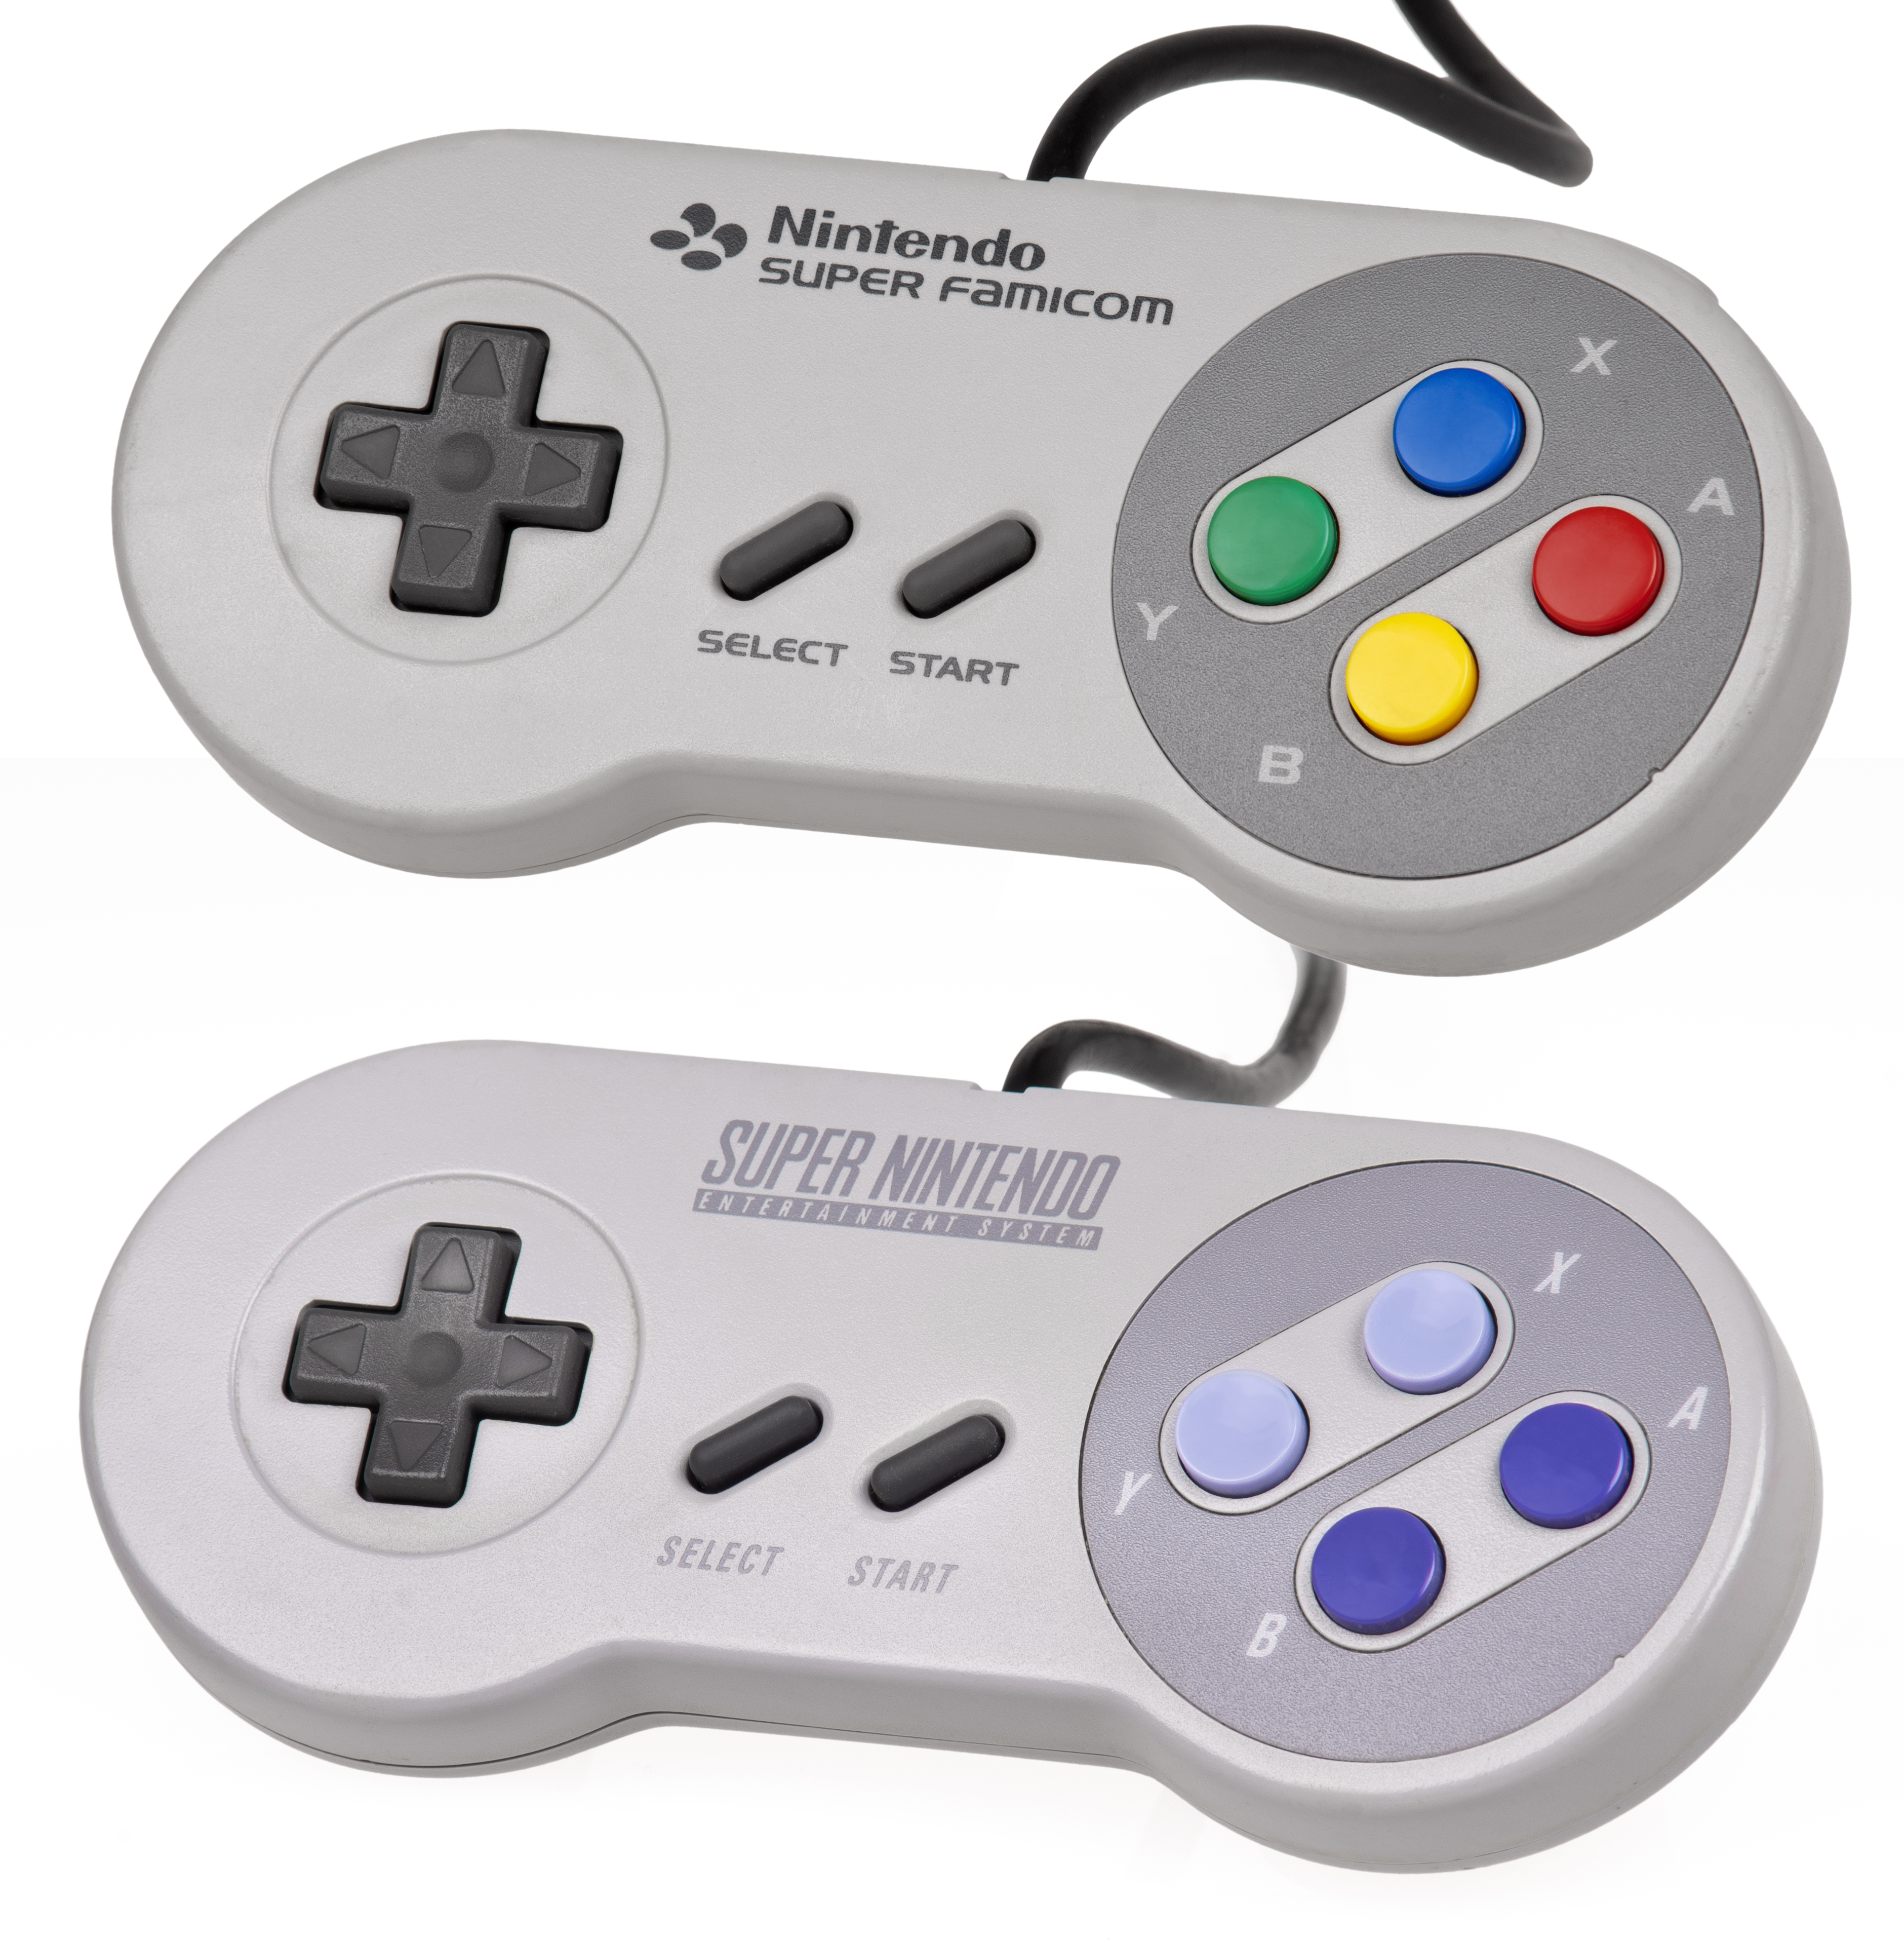 Stort univers Milliard Foragt File:Super Famicom and Super NES Controllers.jpg - Wikimedia Commons